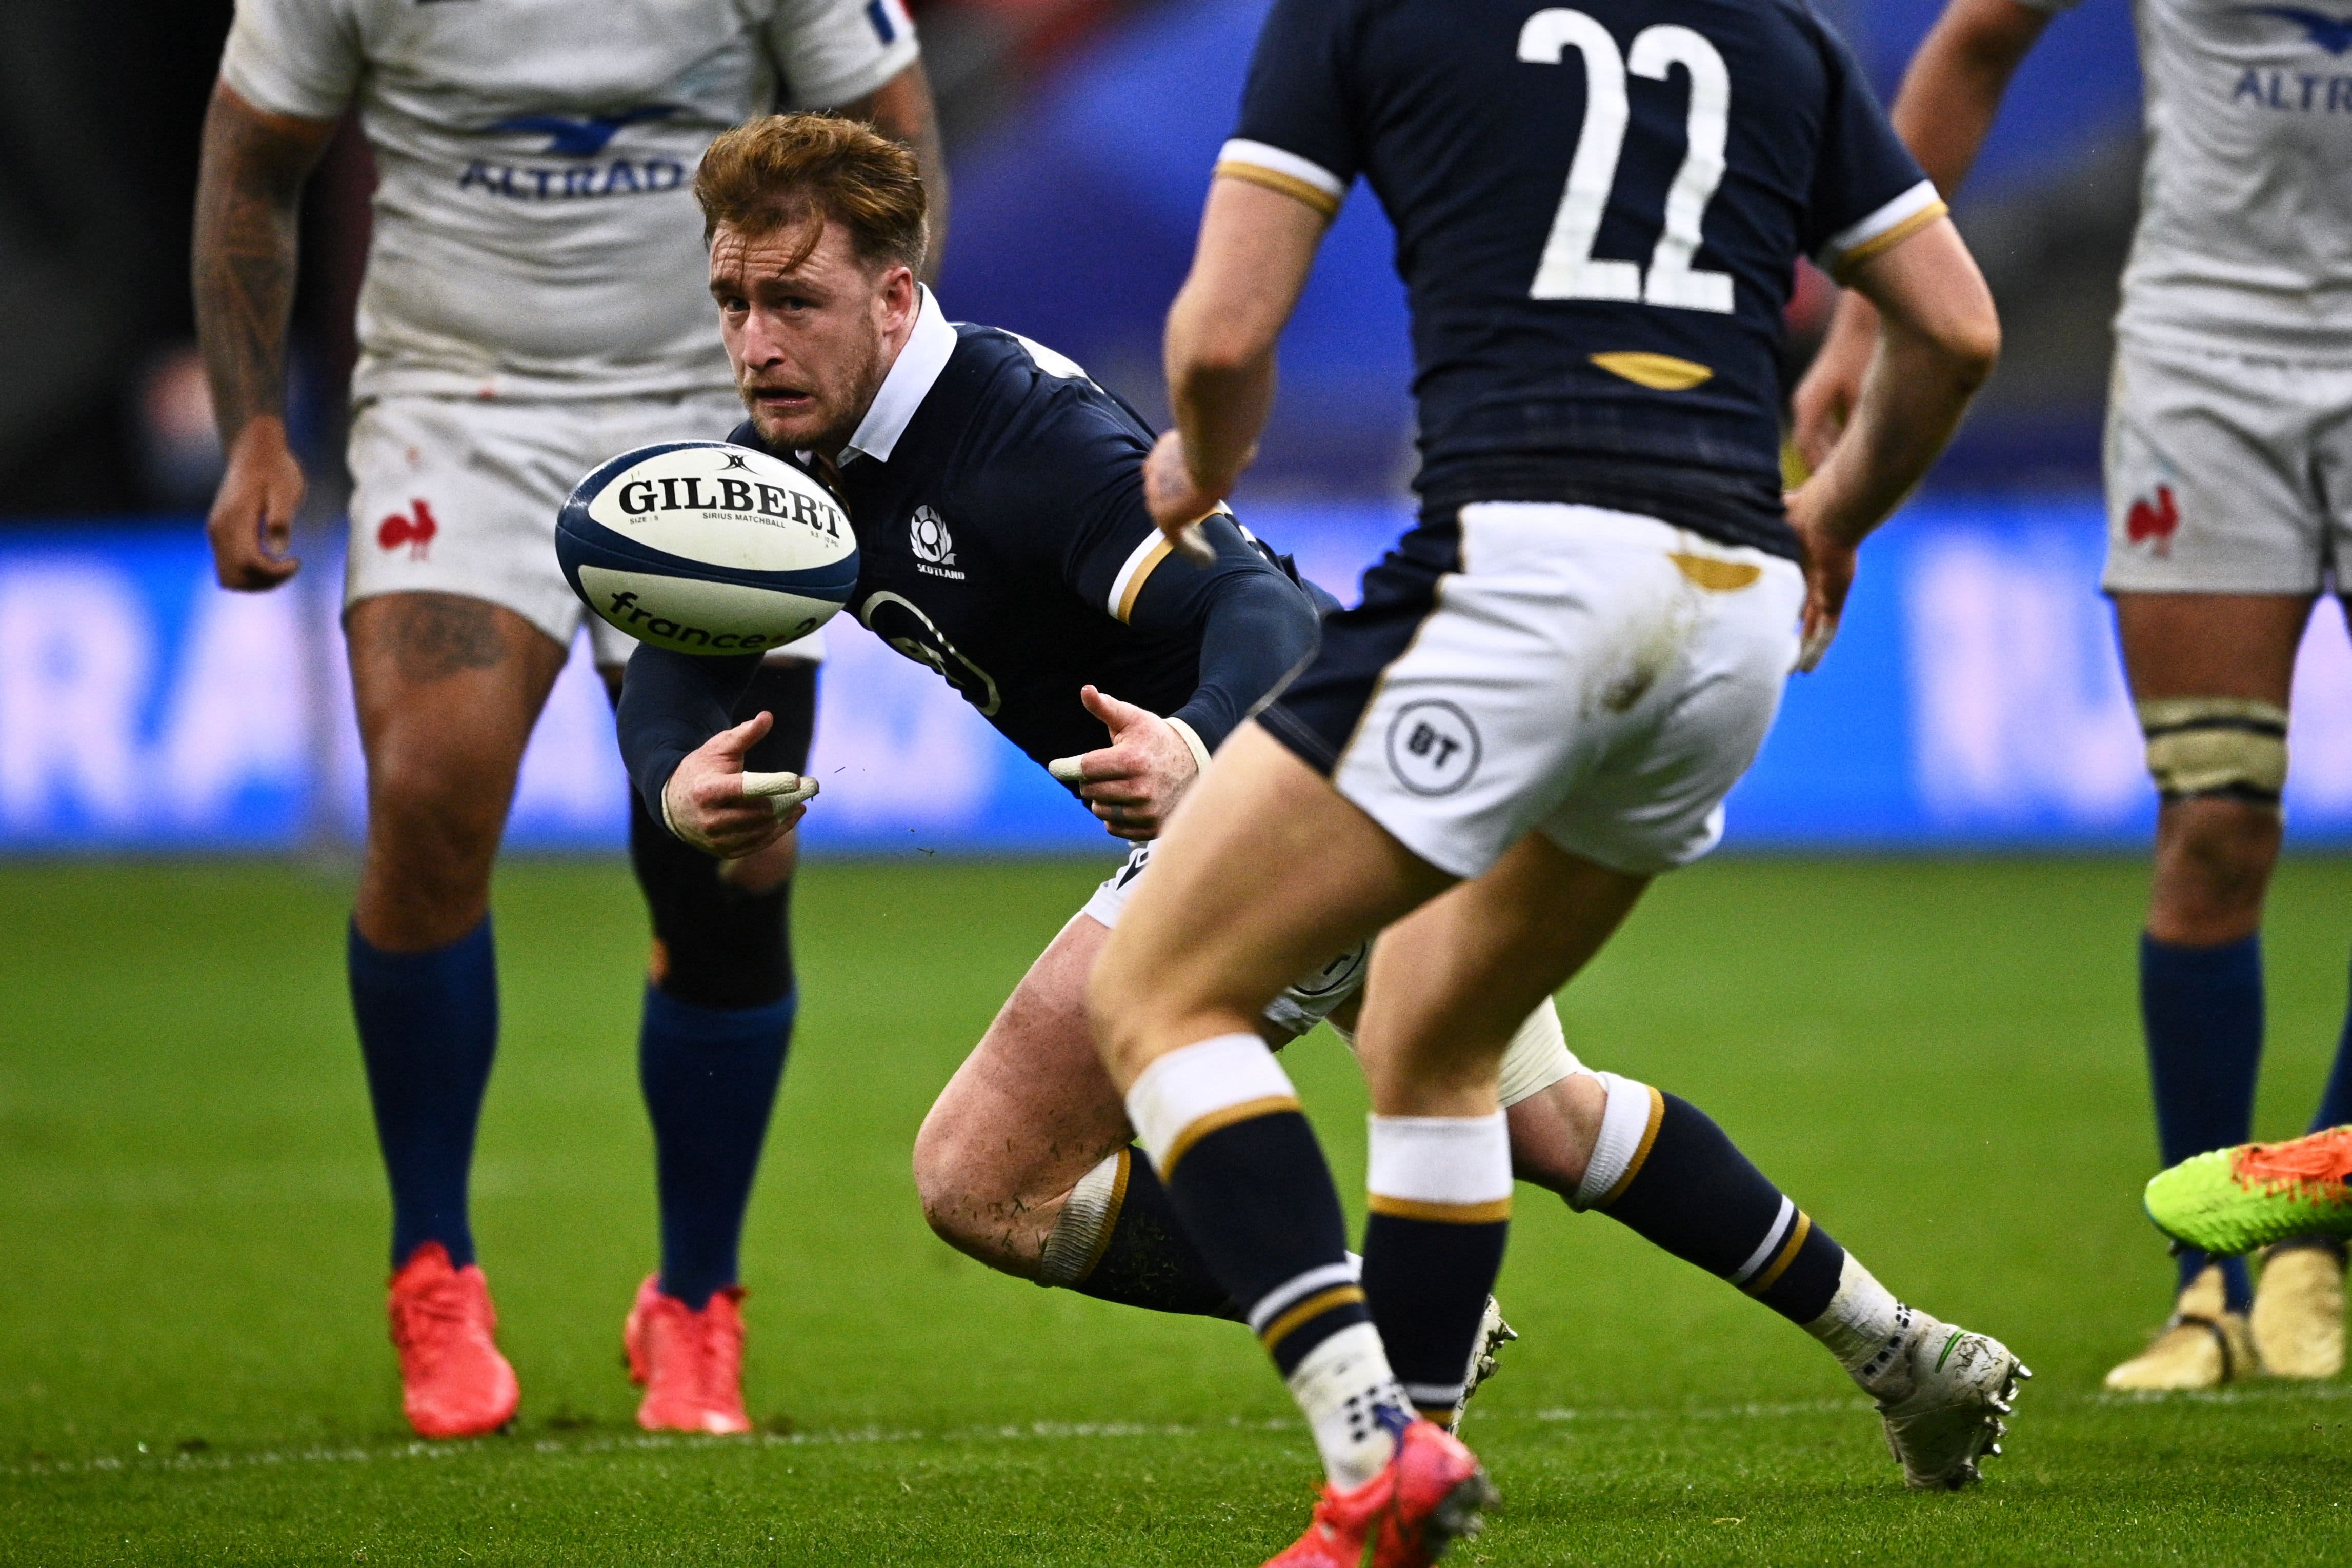 France 23-27 Scotland: Wales crowned Six Nations champions as visitors win in Paris despite Finn Russell red card